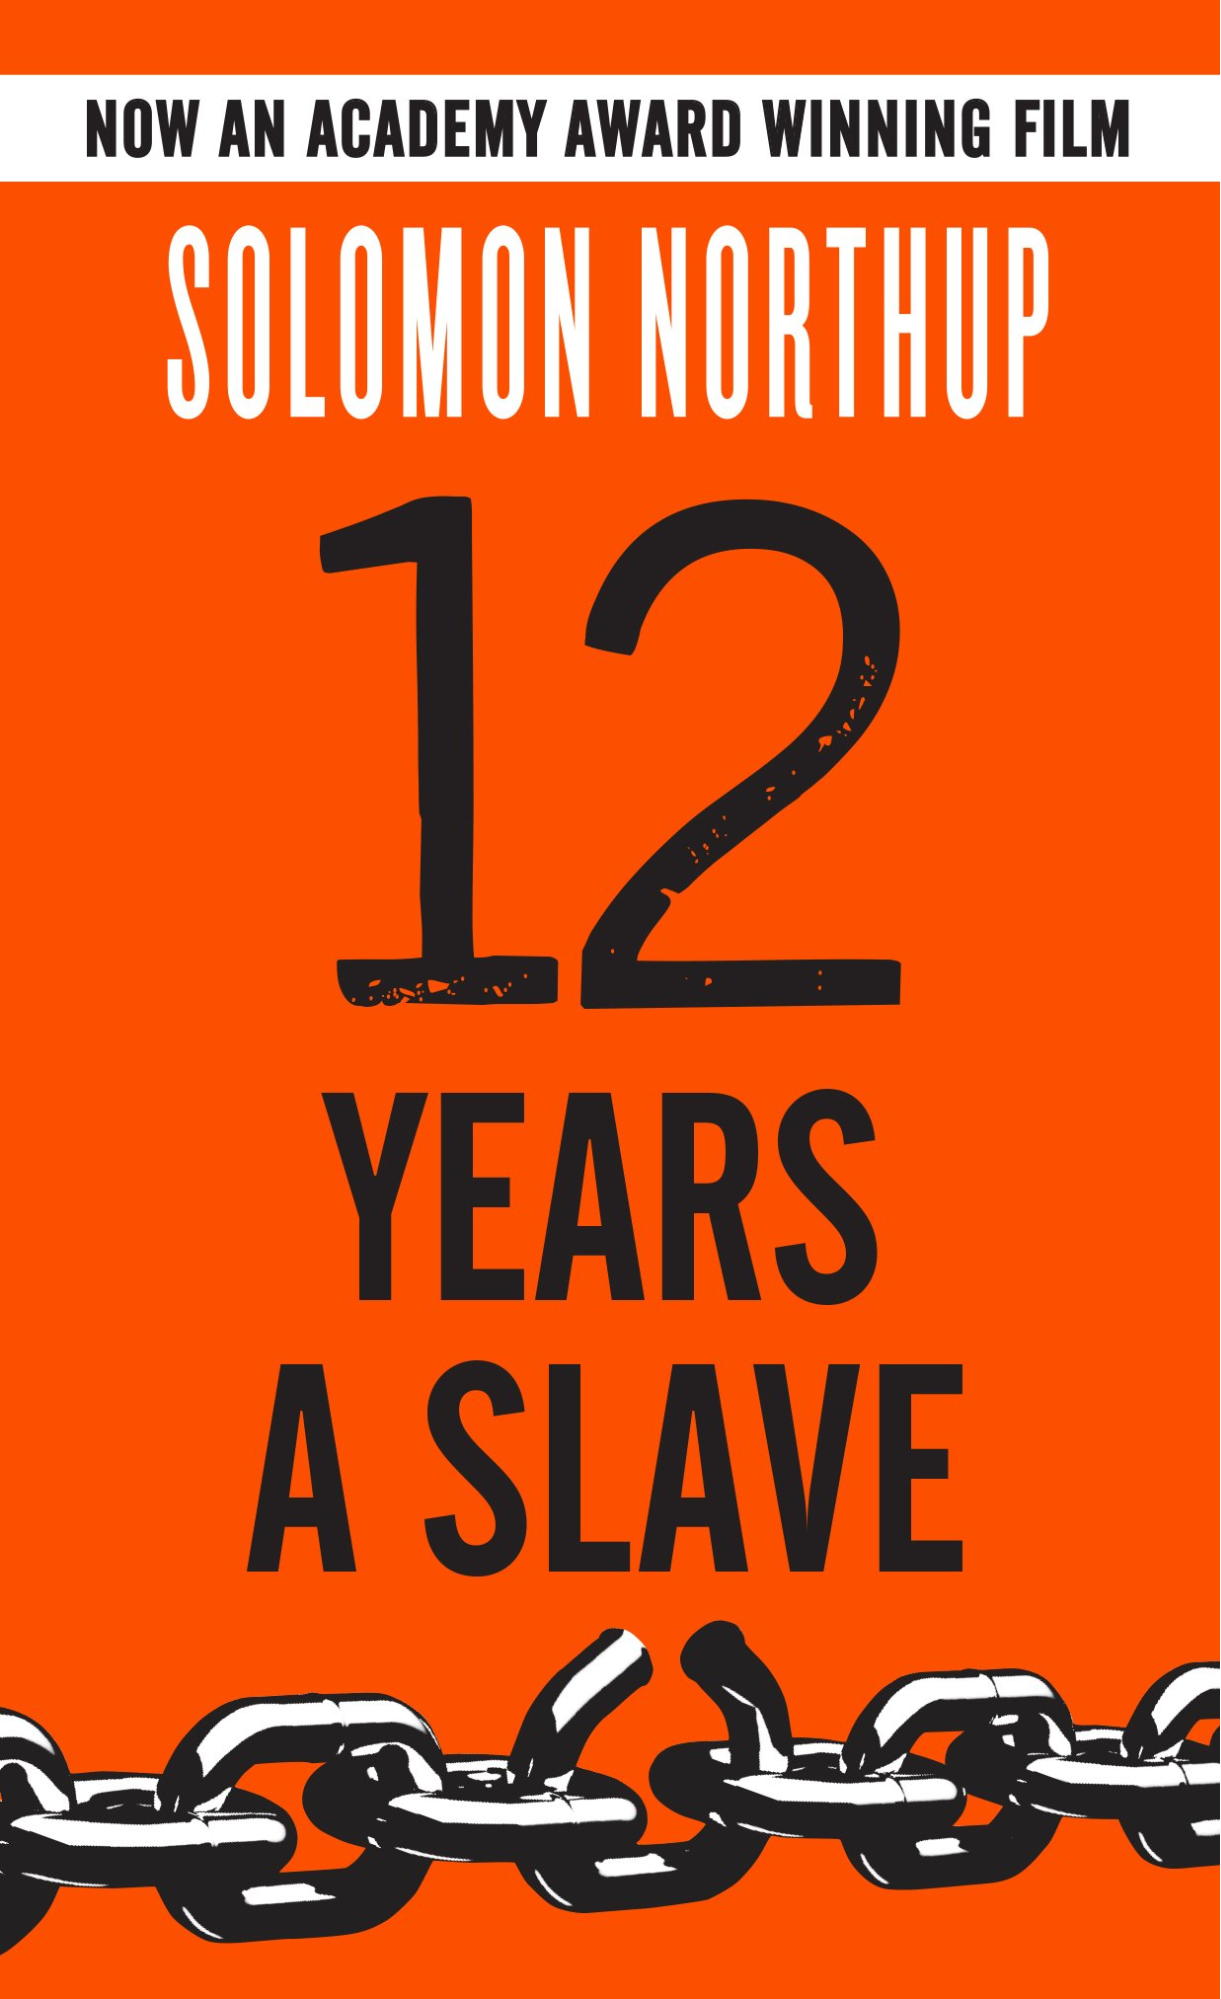 Book Review: 12 Years a Slave